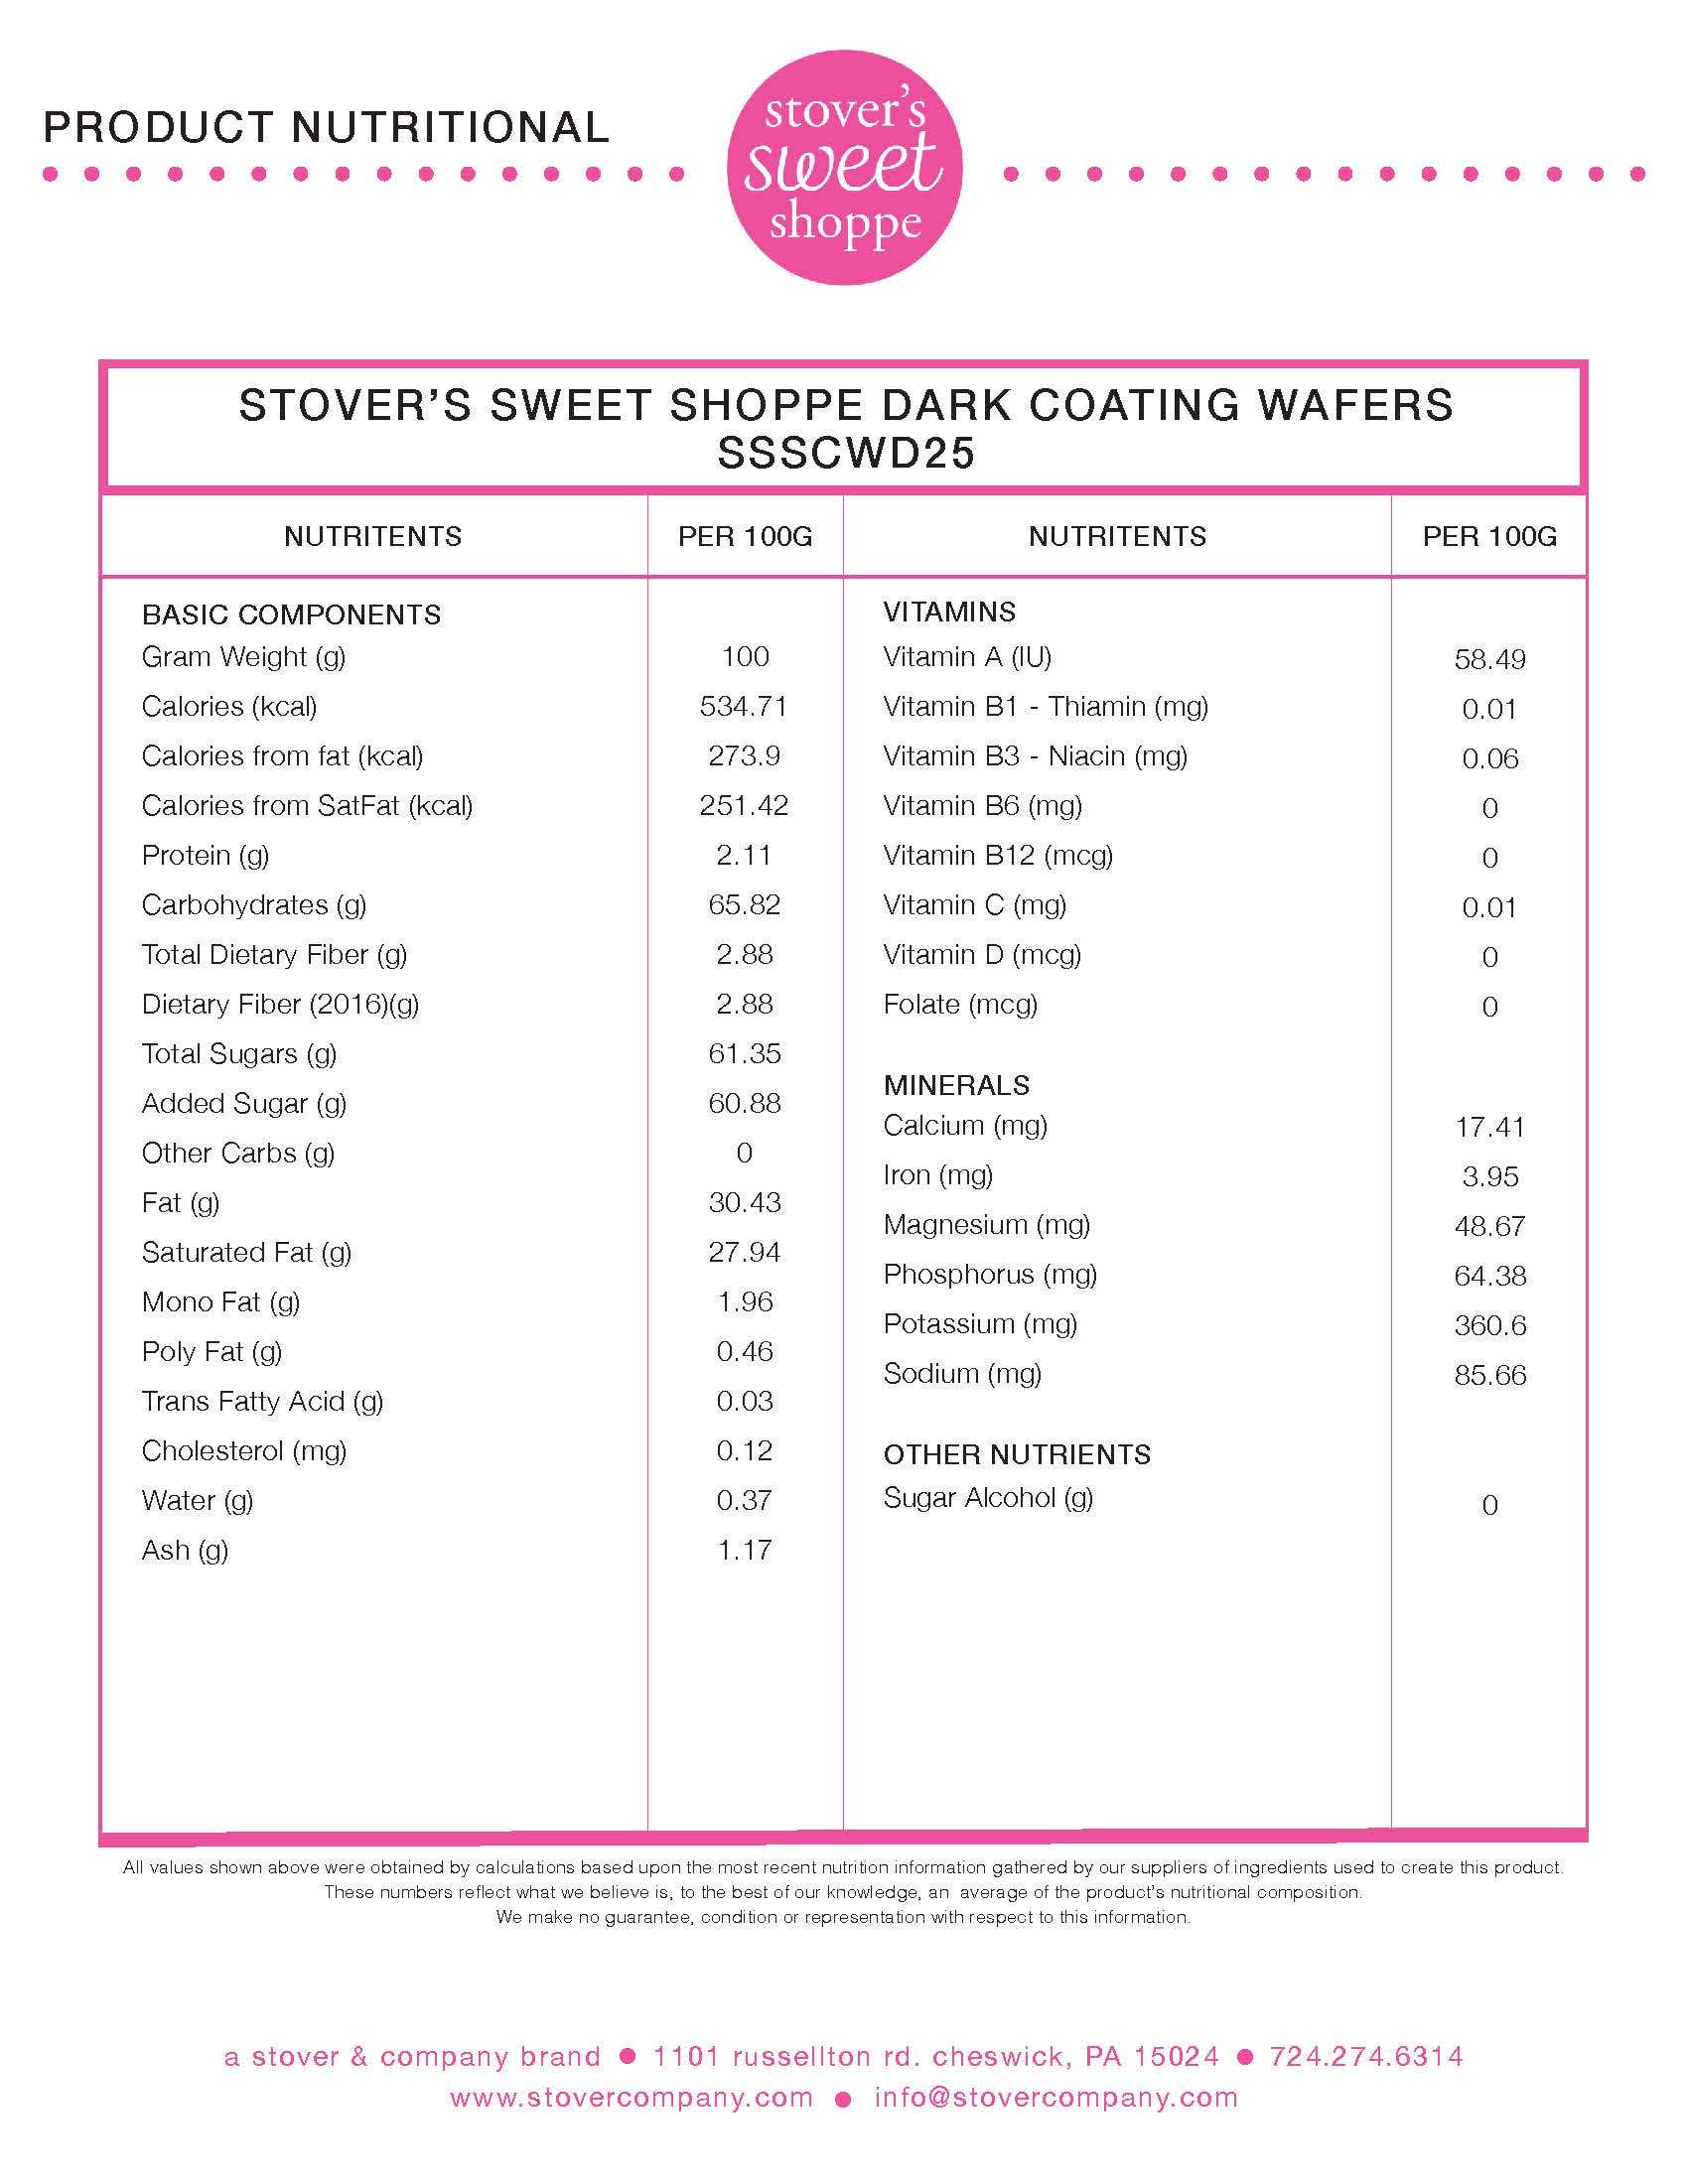 Dark Coating Wafers Nutritional Info by Stover's Sweet Shoppe at Stover & Company